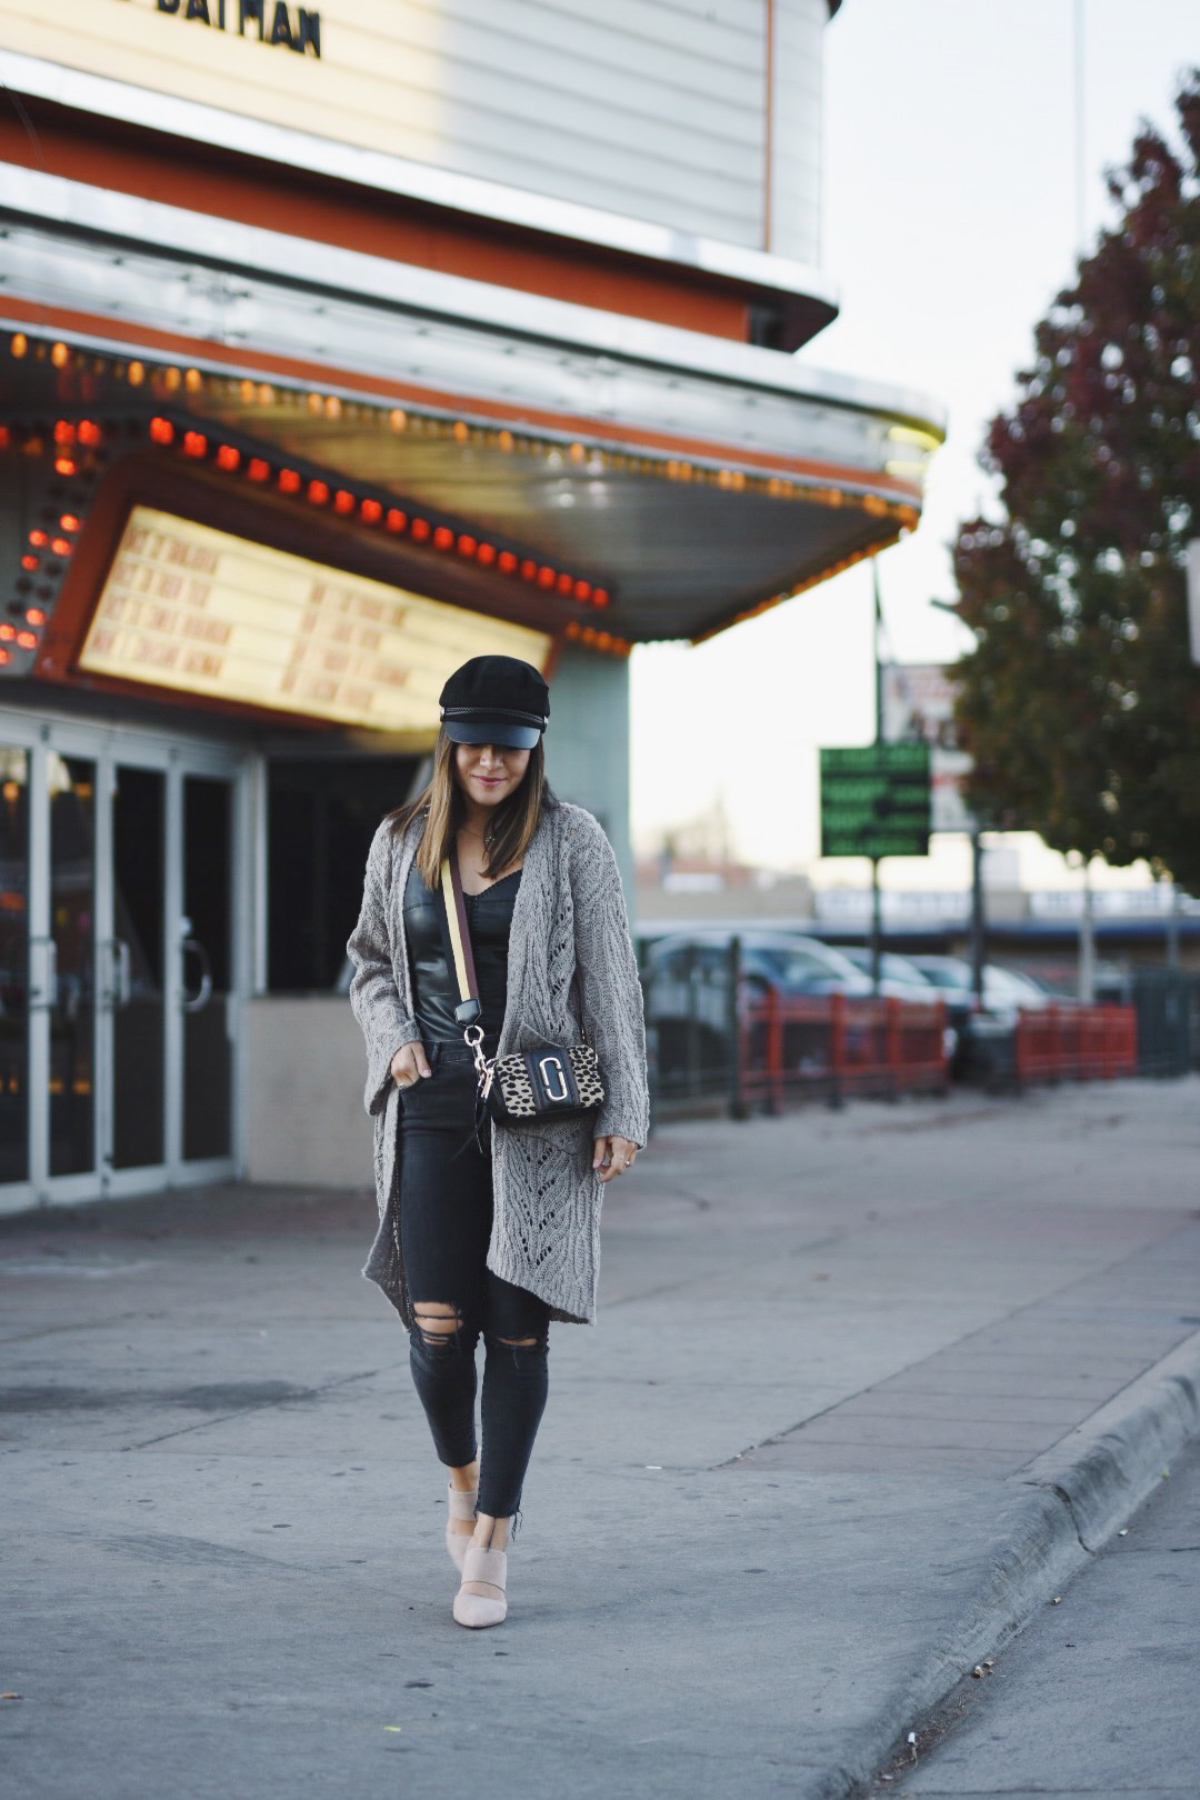 Carolina Hellal of Chic Talk wearing an h&m fisherman cap, Marc jacobs crossbody bag, madewell jeans, chicwish cardigan and nude mules